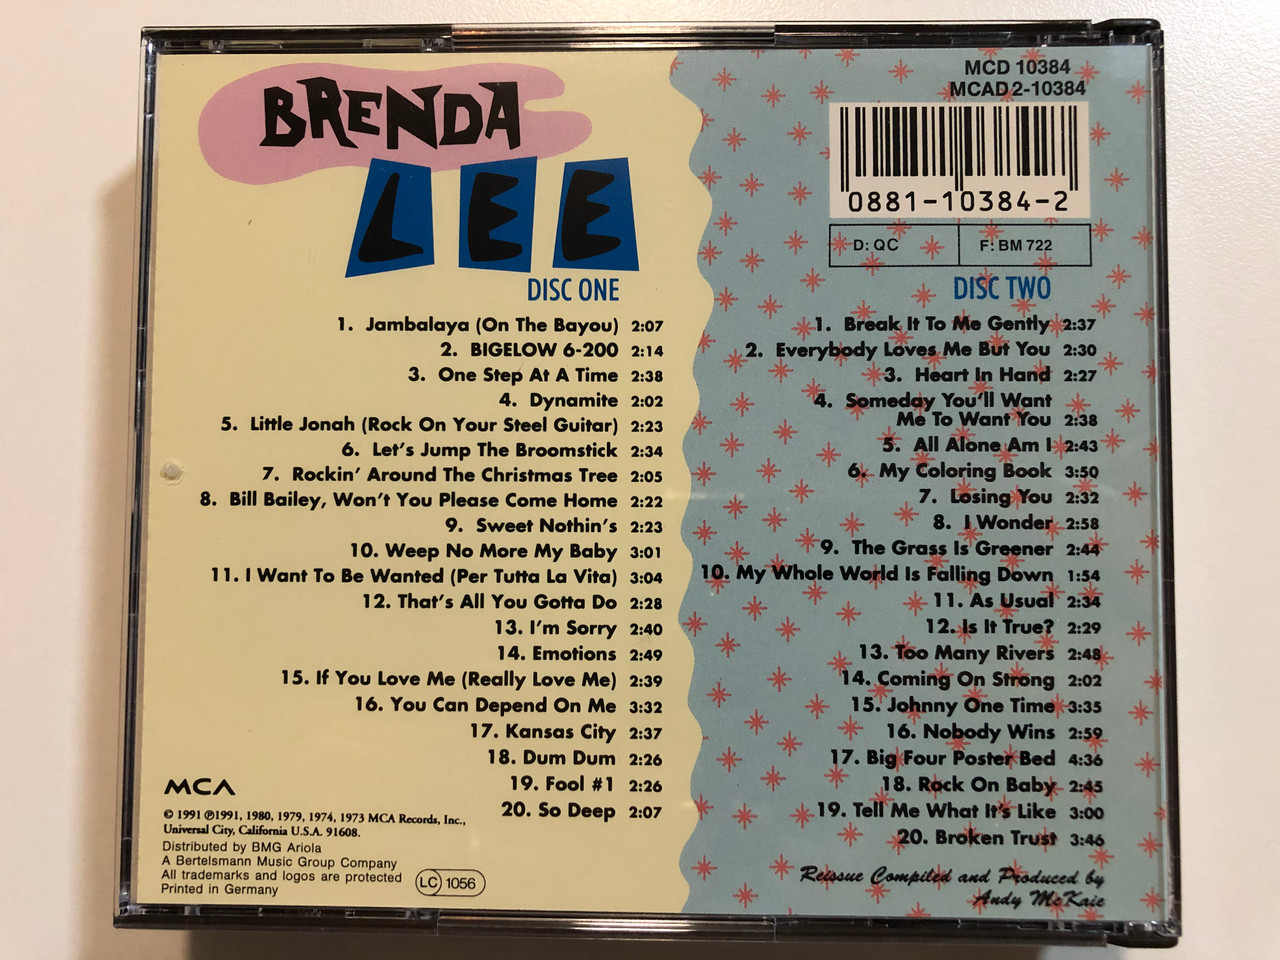 https://cdn10.bigcommerce.com/s-62bdpkt7pb/products/29361/images/175148/Brenda_Lee_Anthology_1956-1980_The_Definitive_Brenda_Lee_Collection_40_Songs_on_Two_Compact_Discs._Contains_all_of_her_Top_20_Pop_Hits._Contains_1_Hour_45_Minutes_of_music_MCA_Records_13__15697.1618429227.1280.1280.JPG?c=2&_ga=2.108899137.2106526039.1618490327-95516592.1618490327